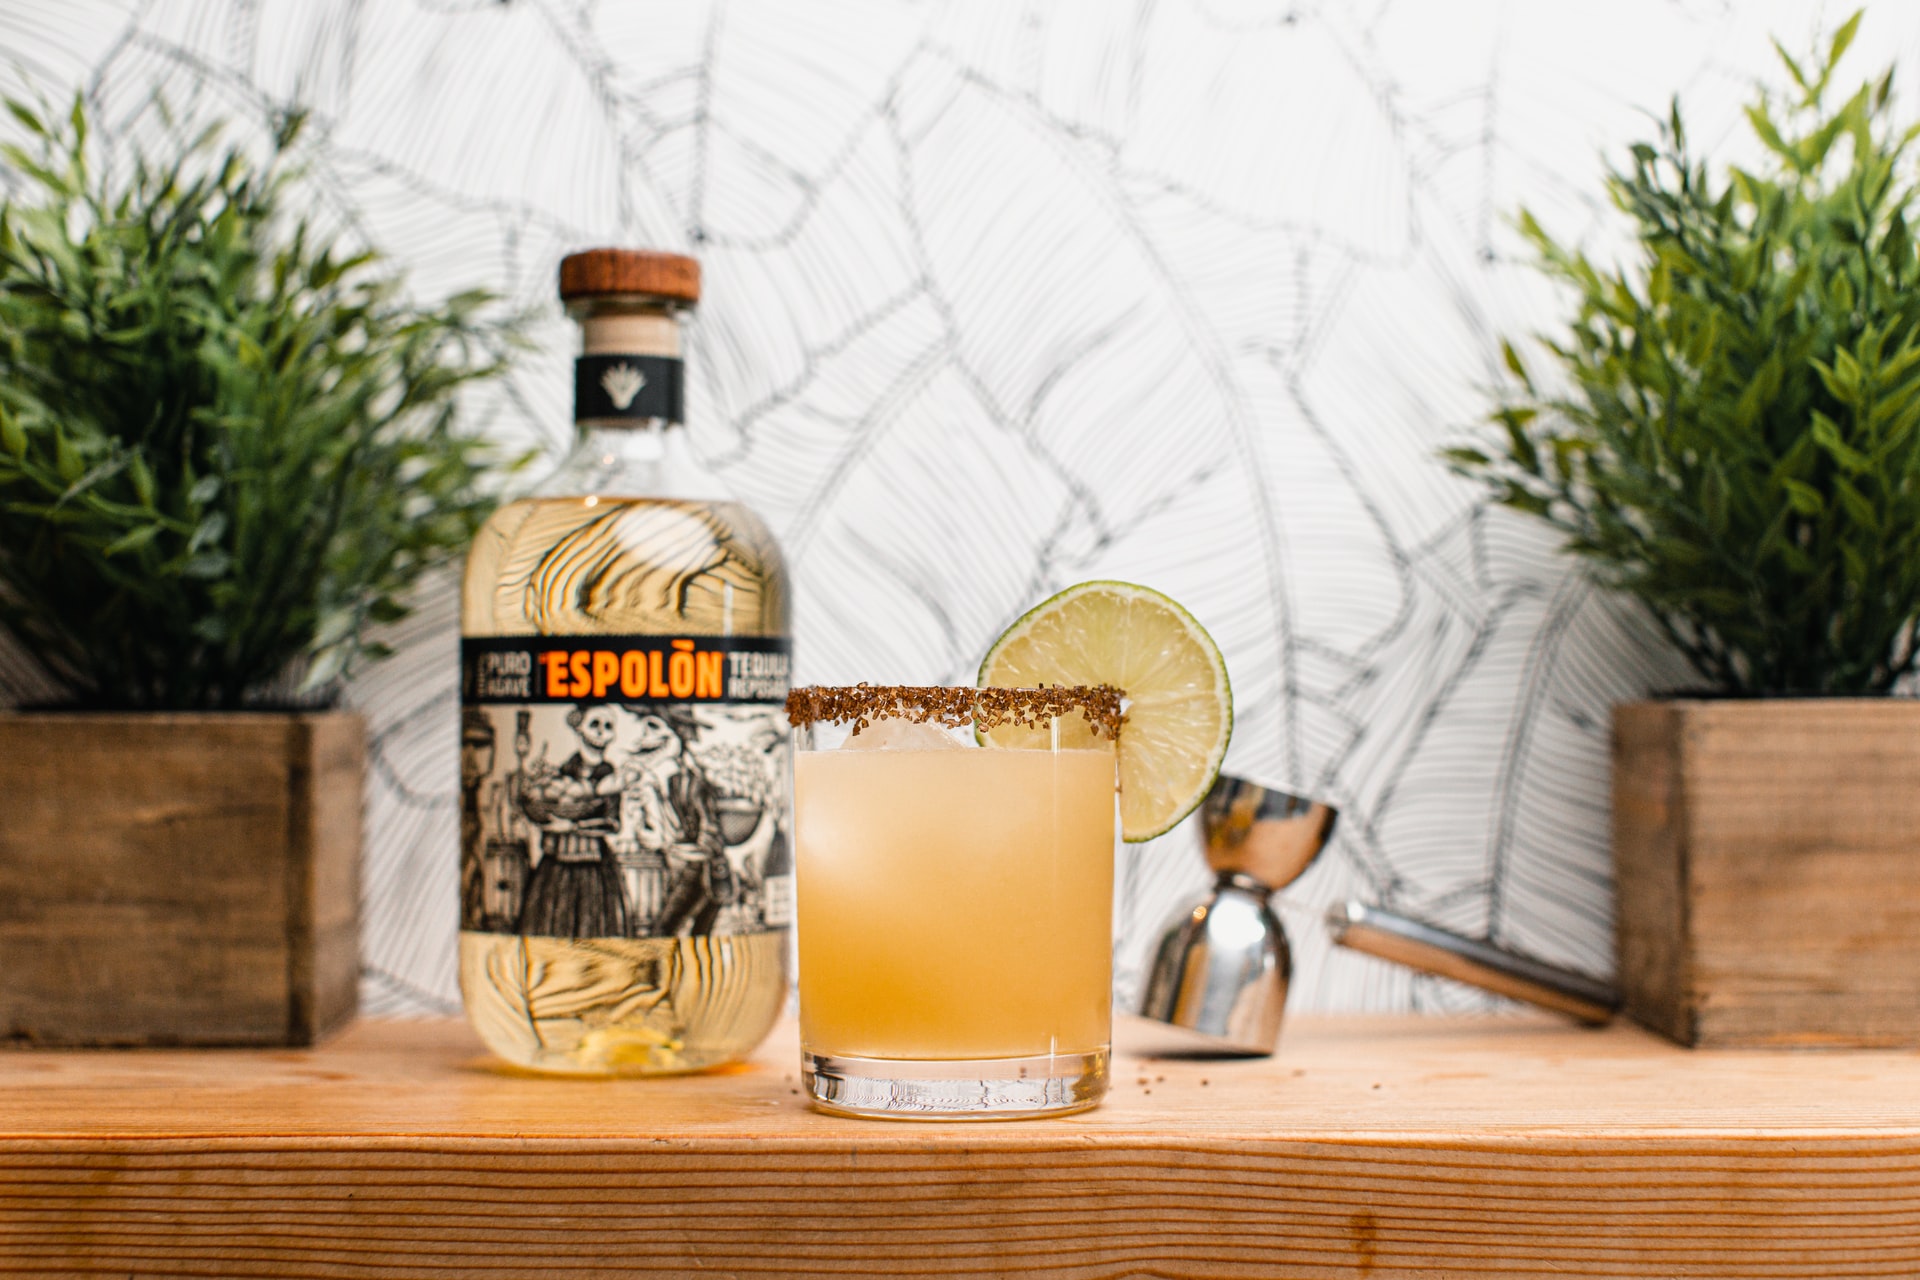 A Paloma with a lime wheel garnish sits on a table next to a bottle of Espolõn tequila.